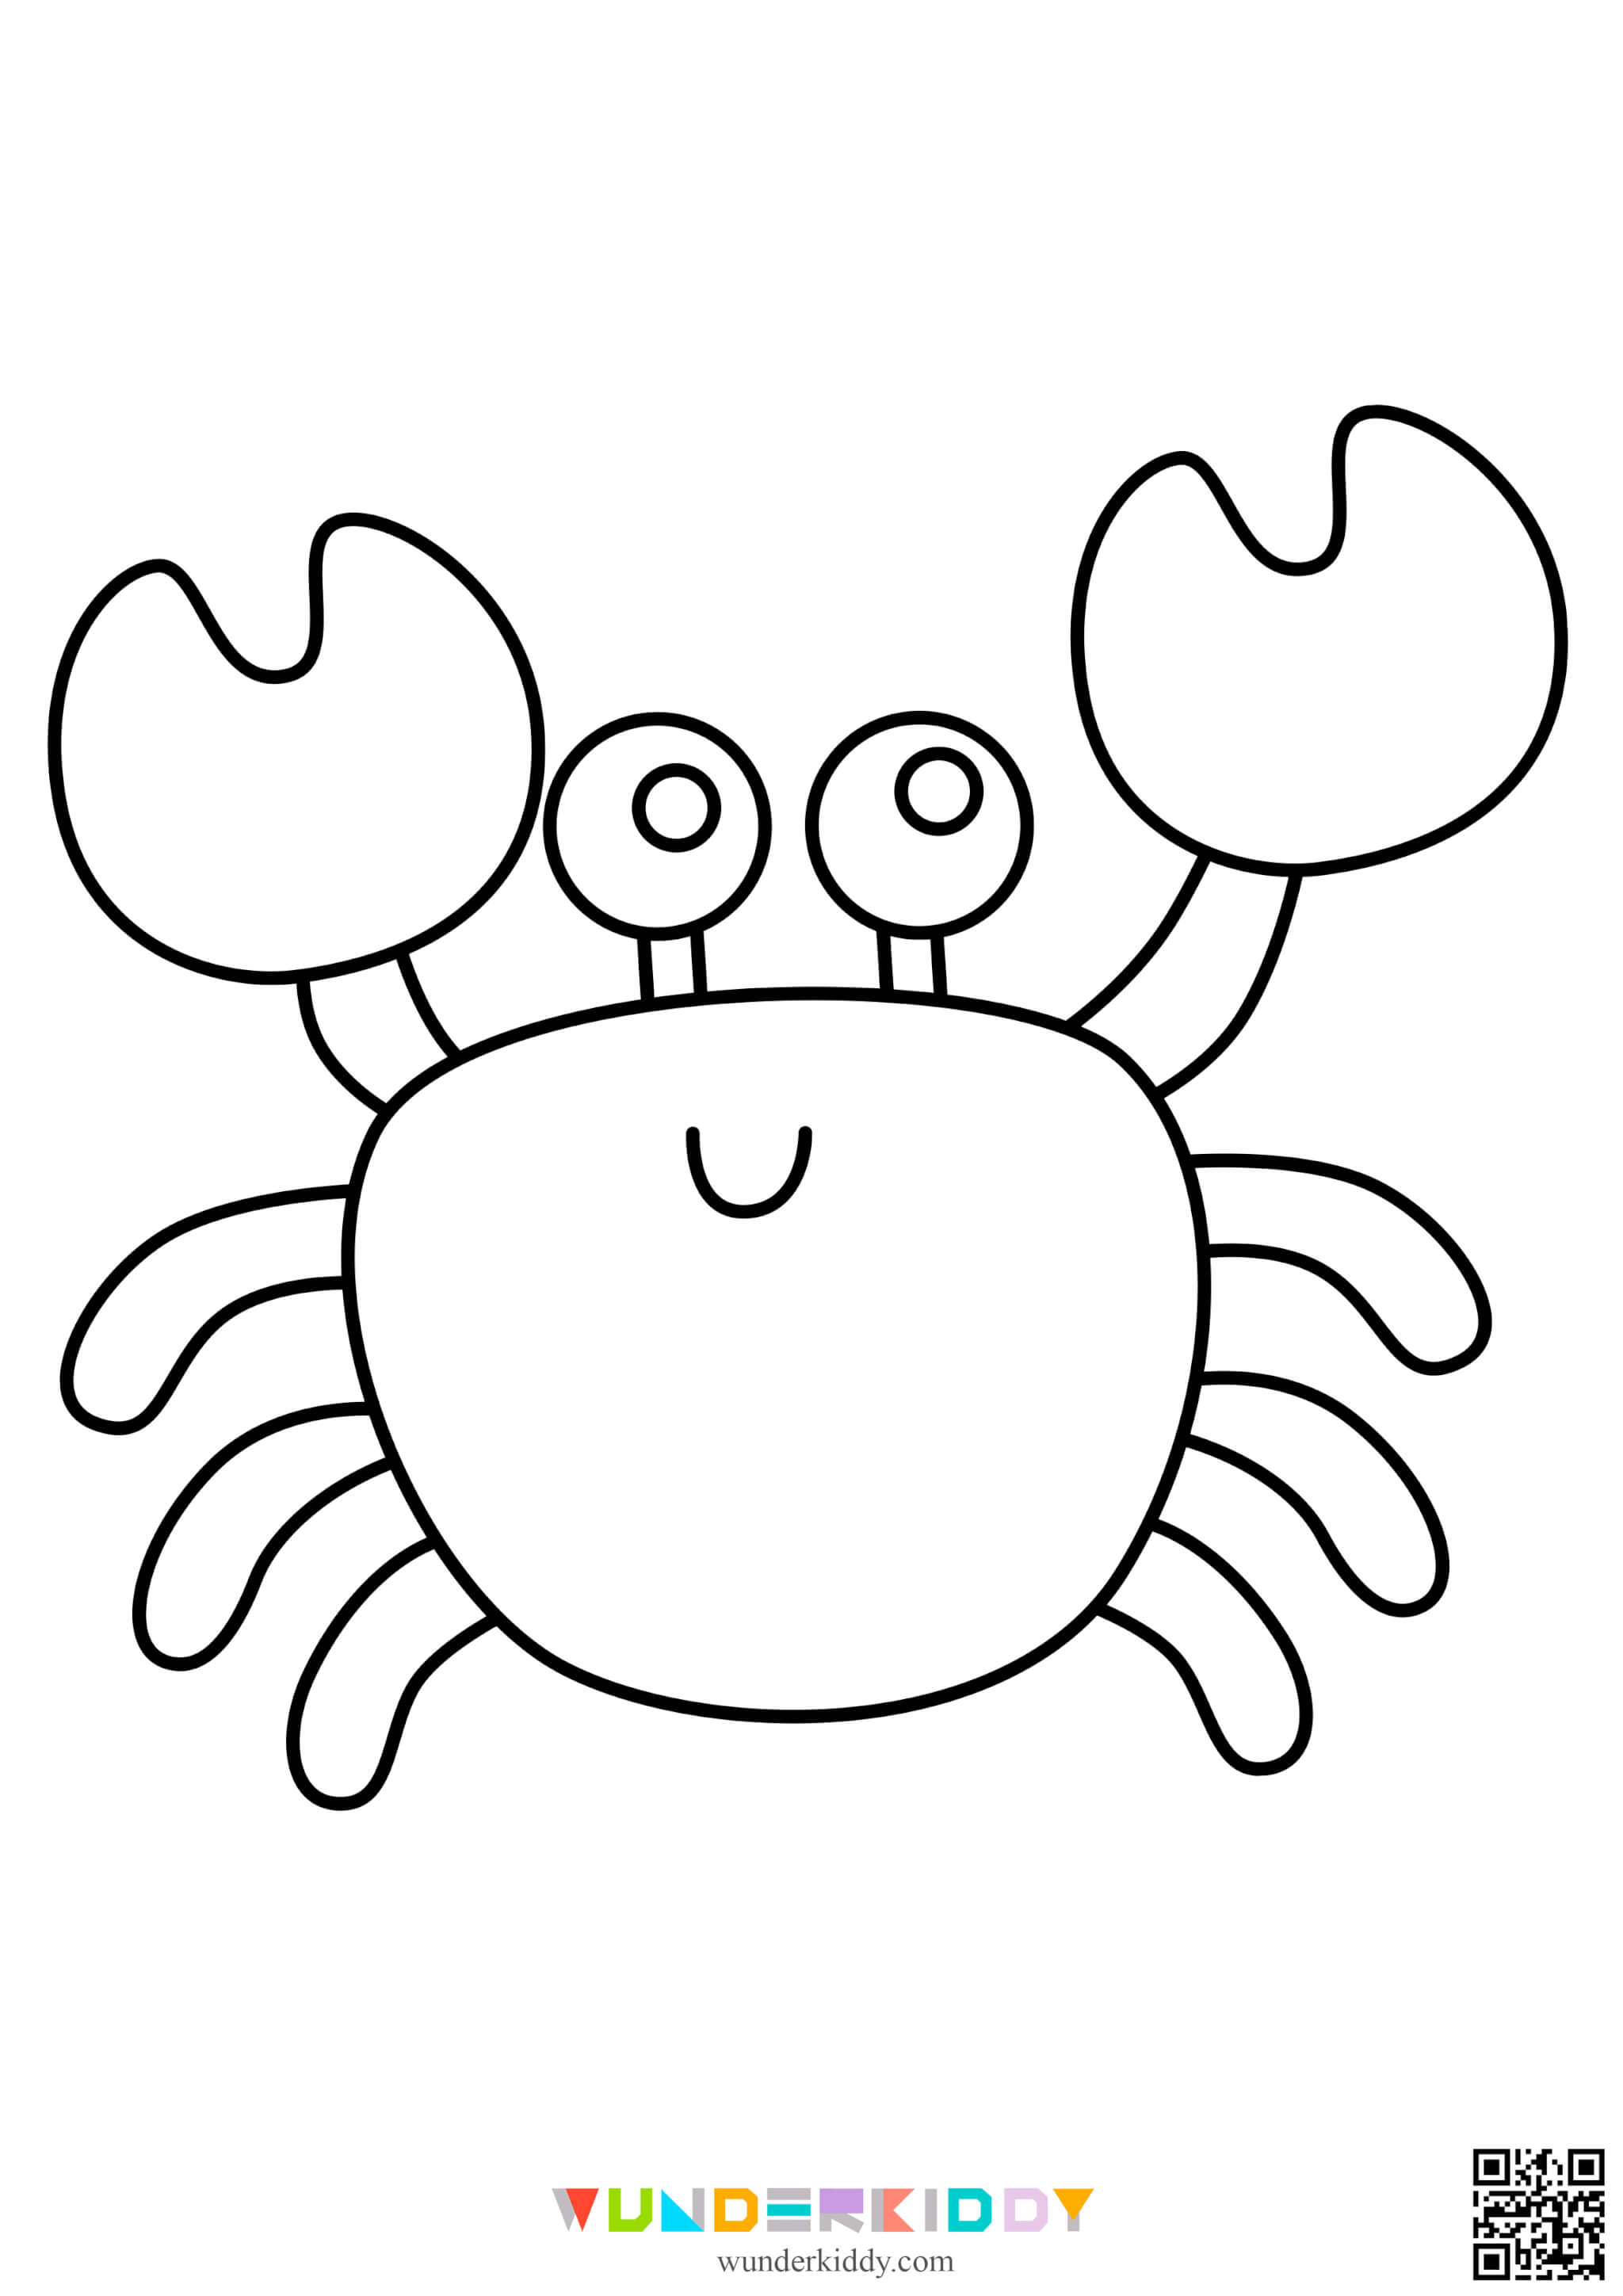 Summer Coloring Pages for Kids - Image 19